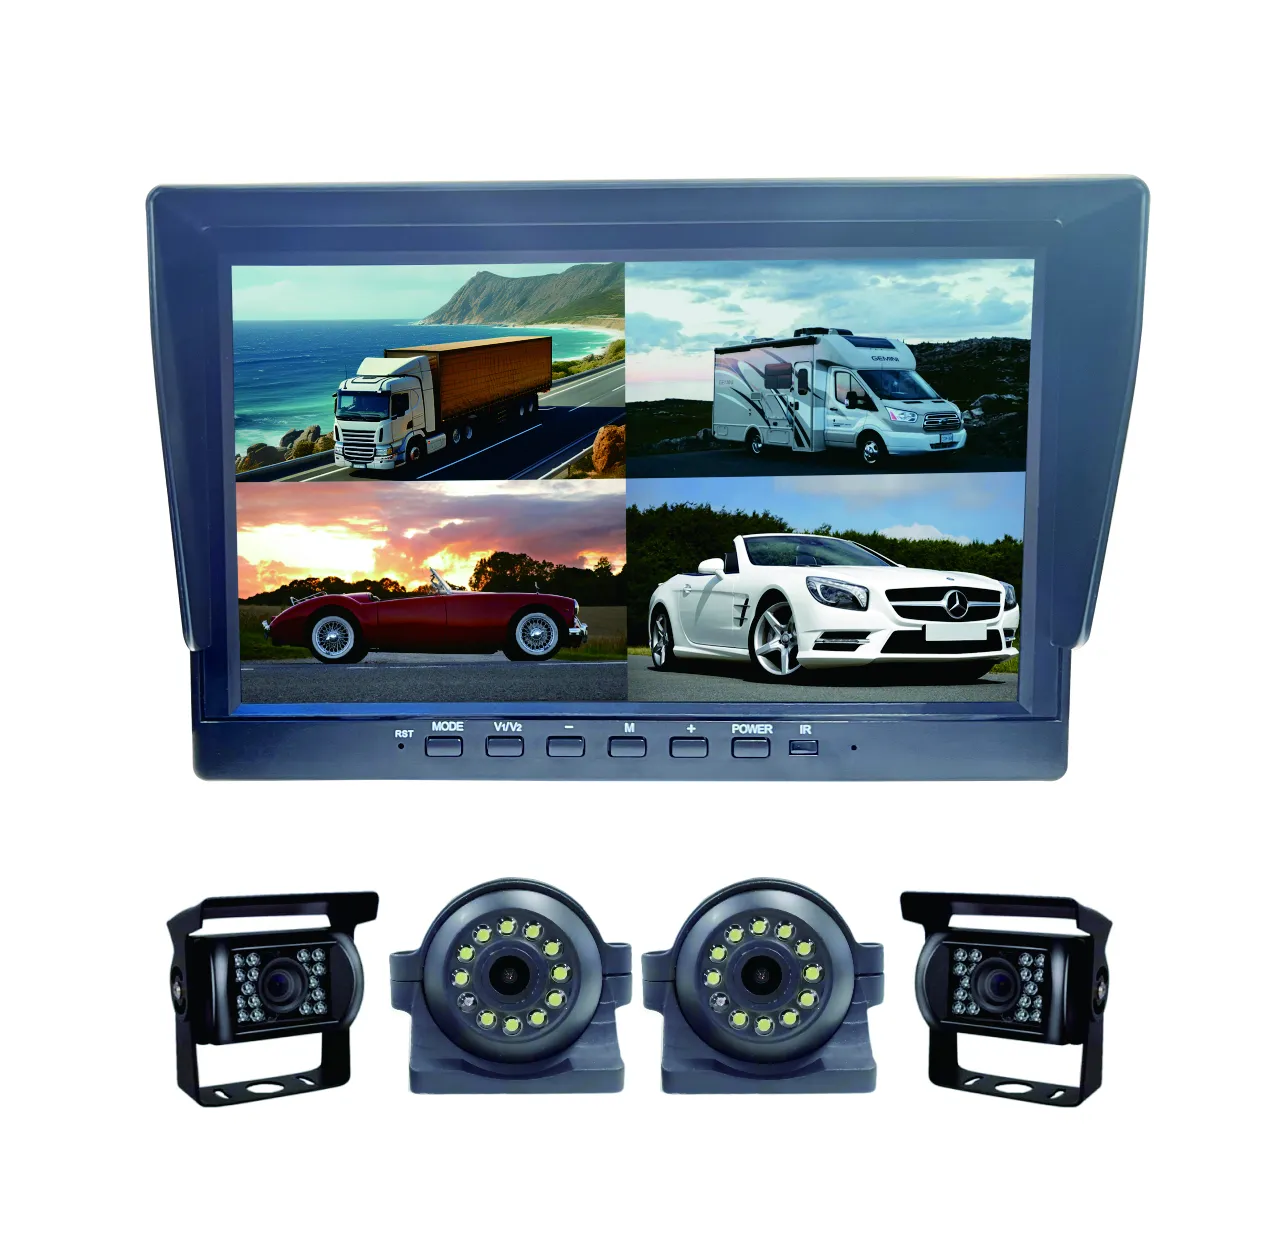 10 inch HD quad screen with 1080P or 720P night vision waterproof side dash camera system for bus travel and school buses